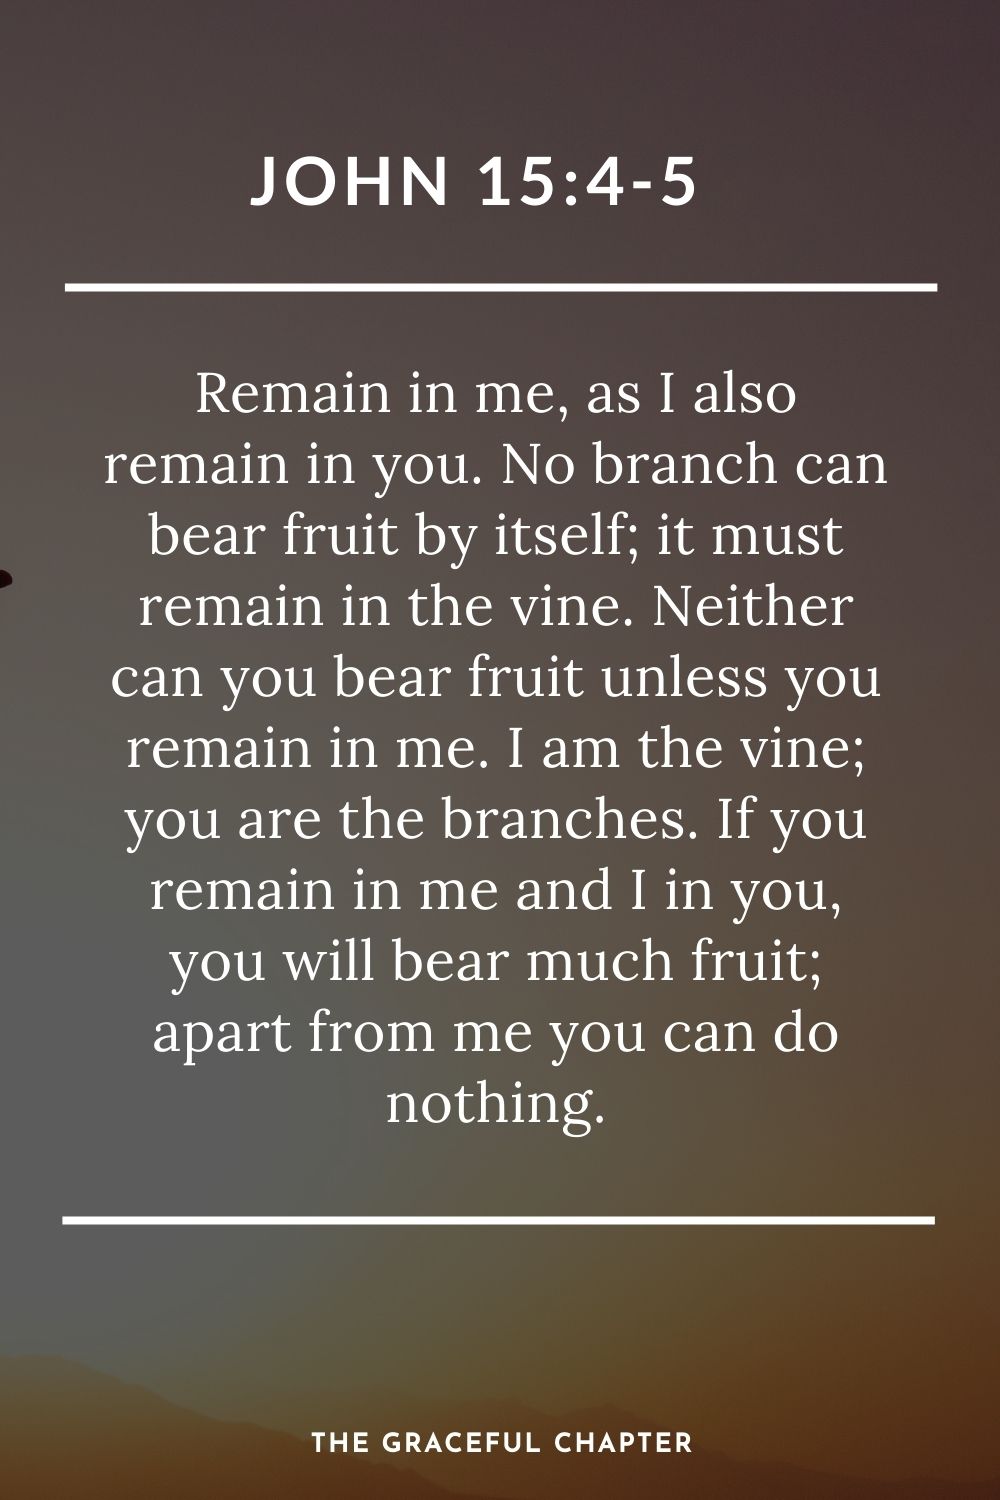 Remain in me, as I also remain in you. No branch can bear fruit by itself; it must remain in the vine. Neither can you bear fruit unless you remain in me. I am the vine; you are the branches. If you remain in me and I in you, you will bear much fruit; apart from me you can do nothing. John 15:4-5